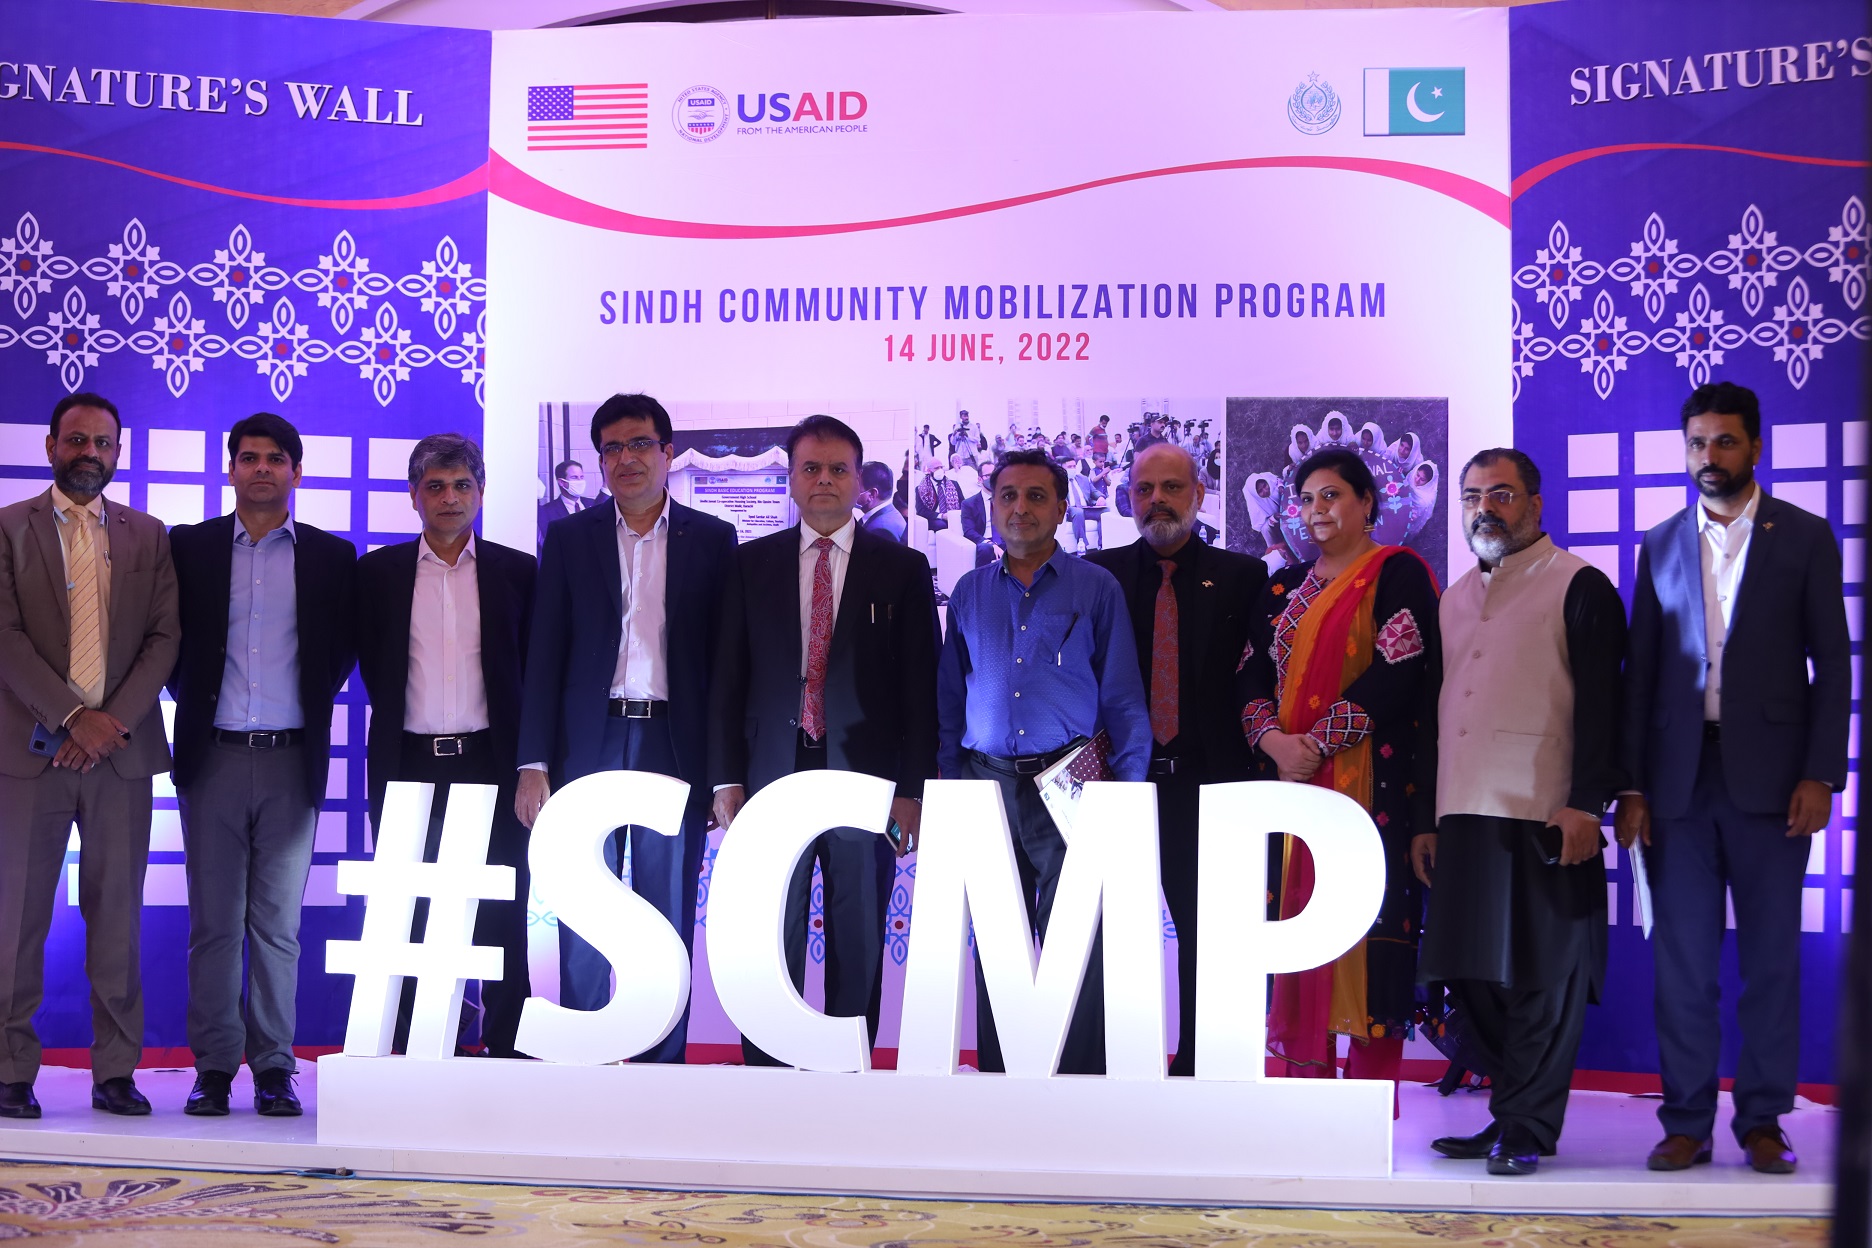 Ceremony to showcase the achievements of USAID’s Sindh Community Mobilization Program